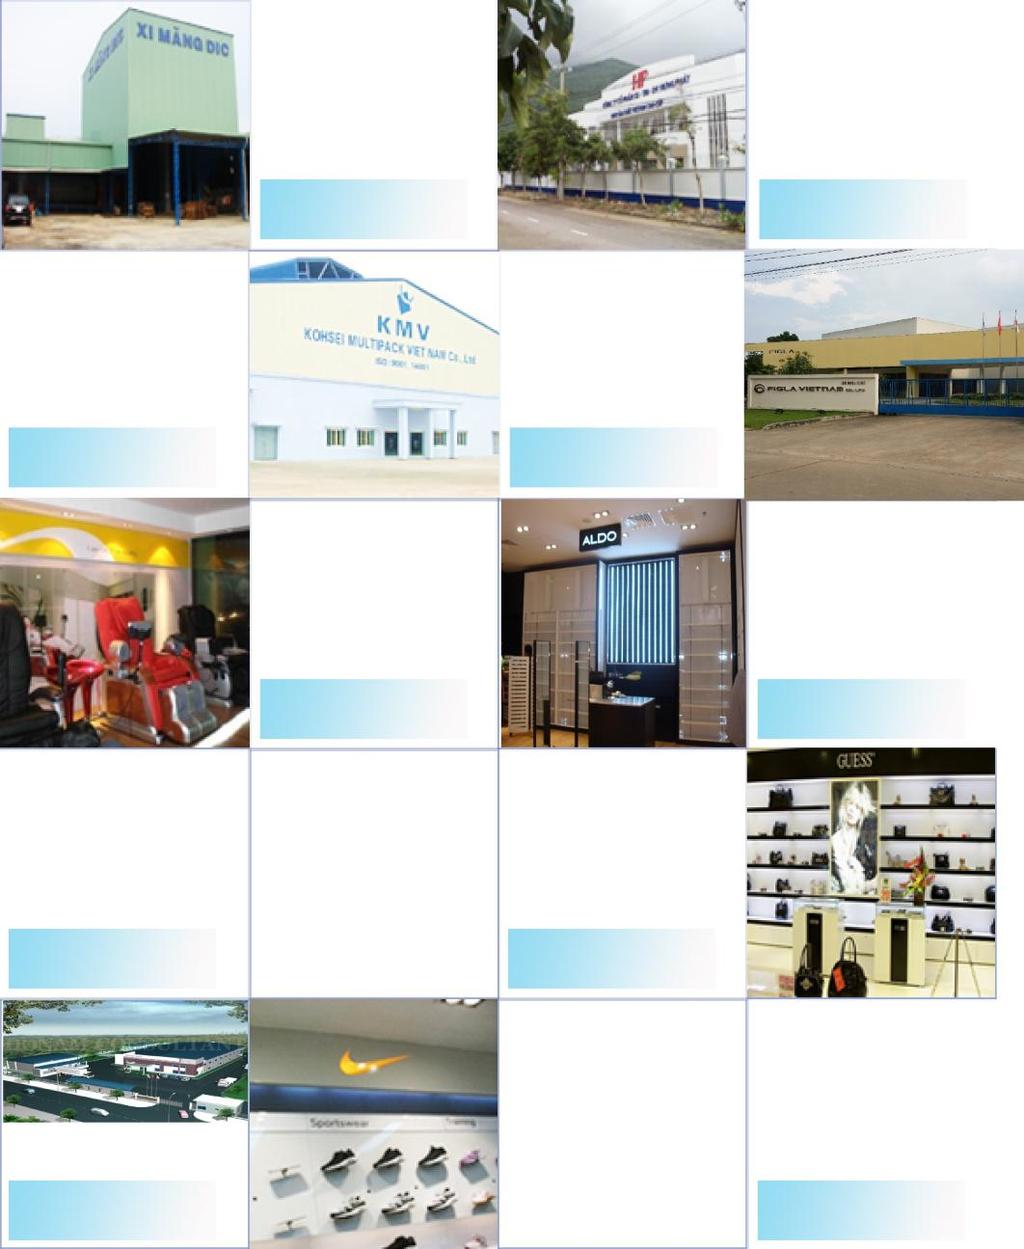 DIC Factory Block A2, Lot 8, Chon Thanh Industrial Zone, Thanh Tam Commune, Chon Thanh District, Binh Phuoc Province.